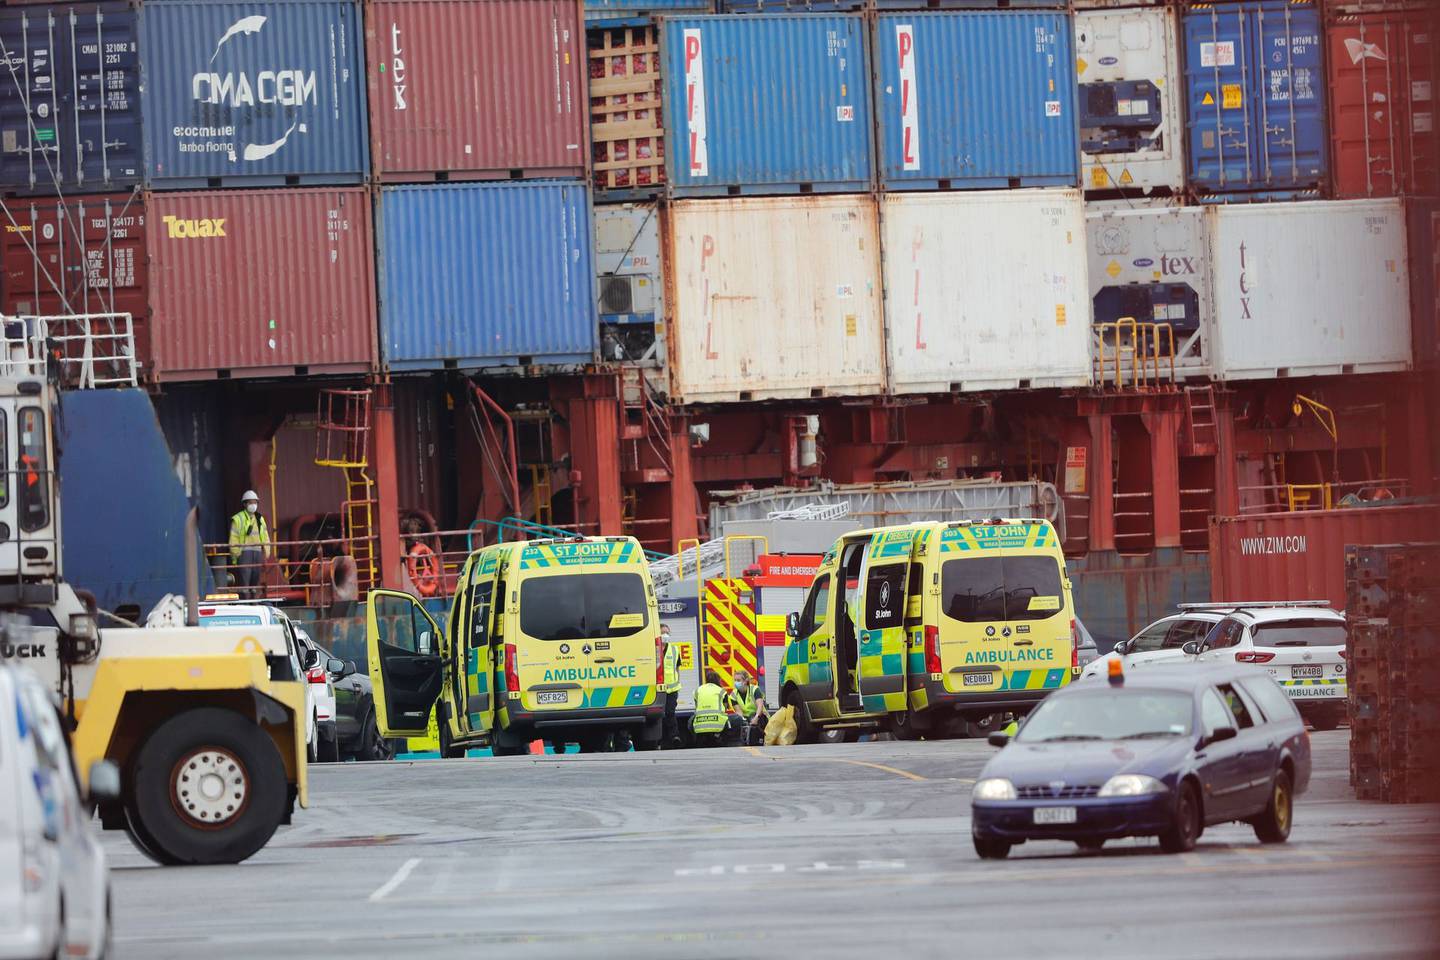 The scene at the Ports of Auckland where a worker suffered fatal injuries. Photo / Dean Purcell